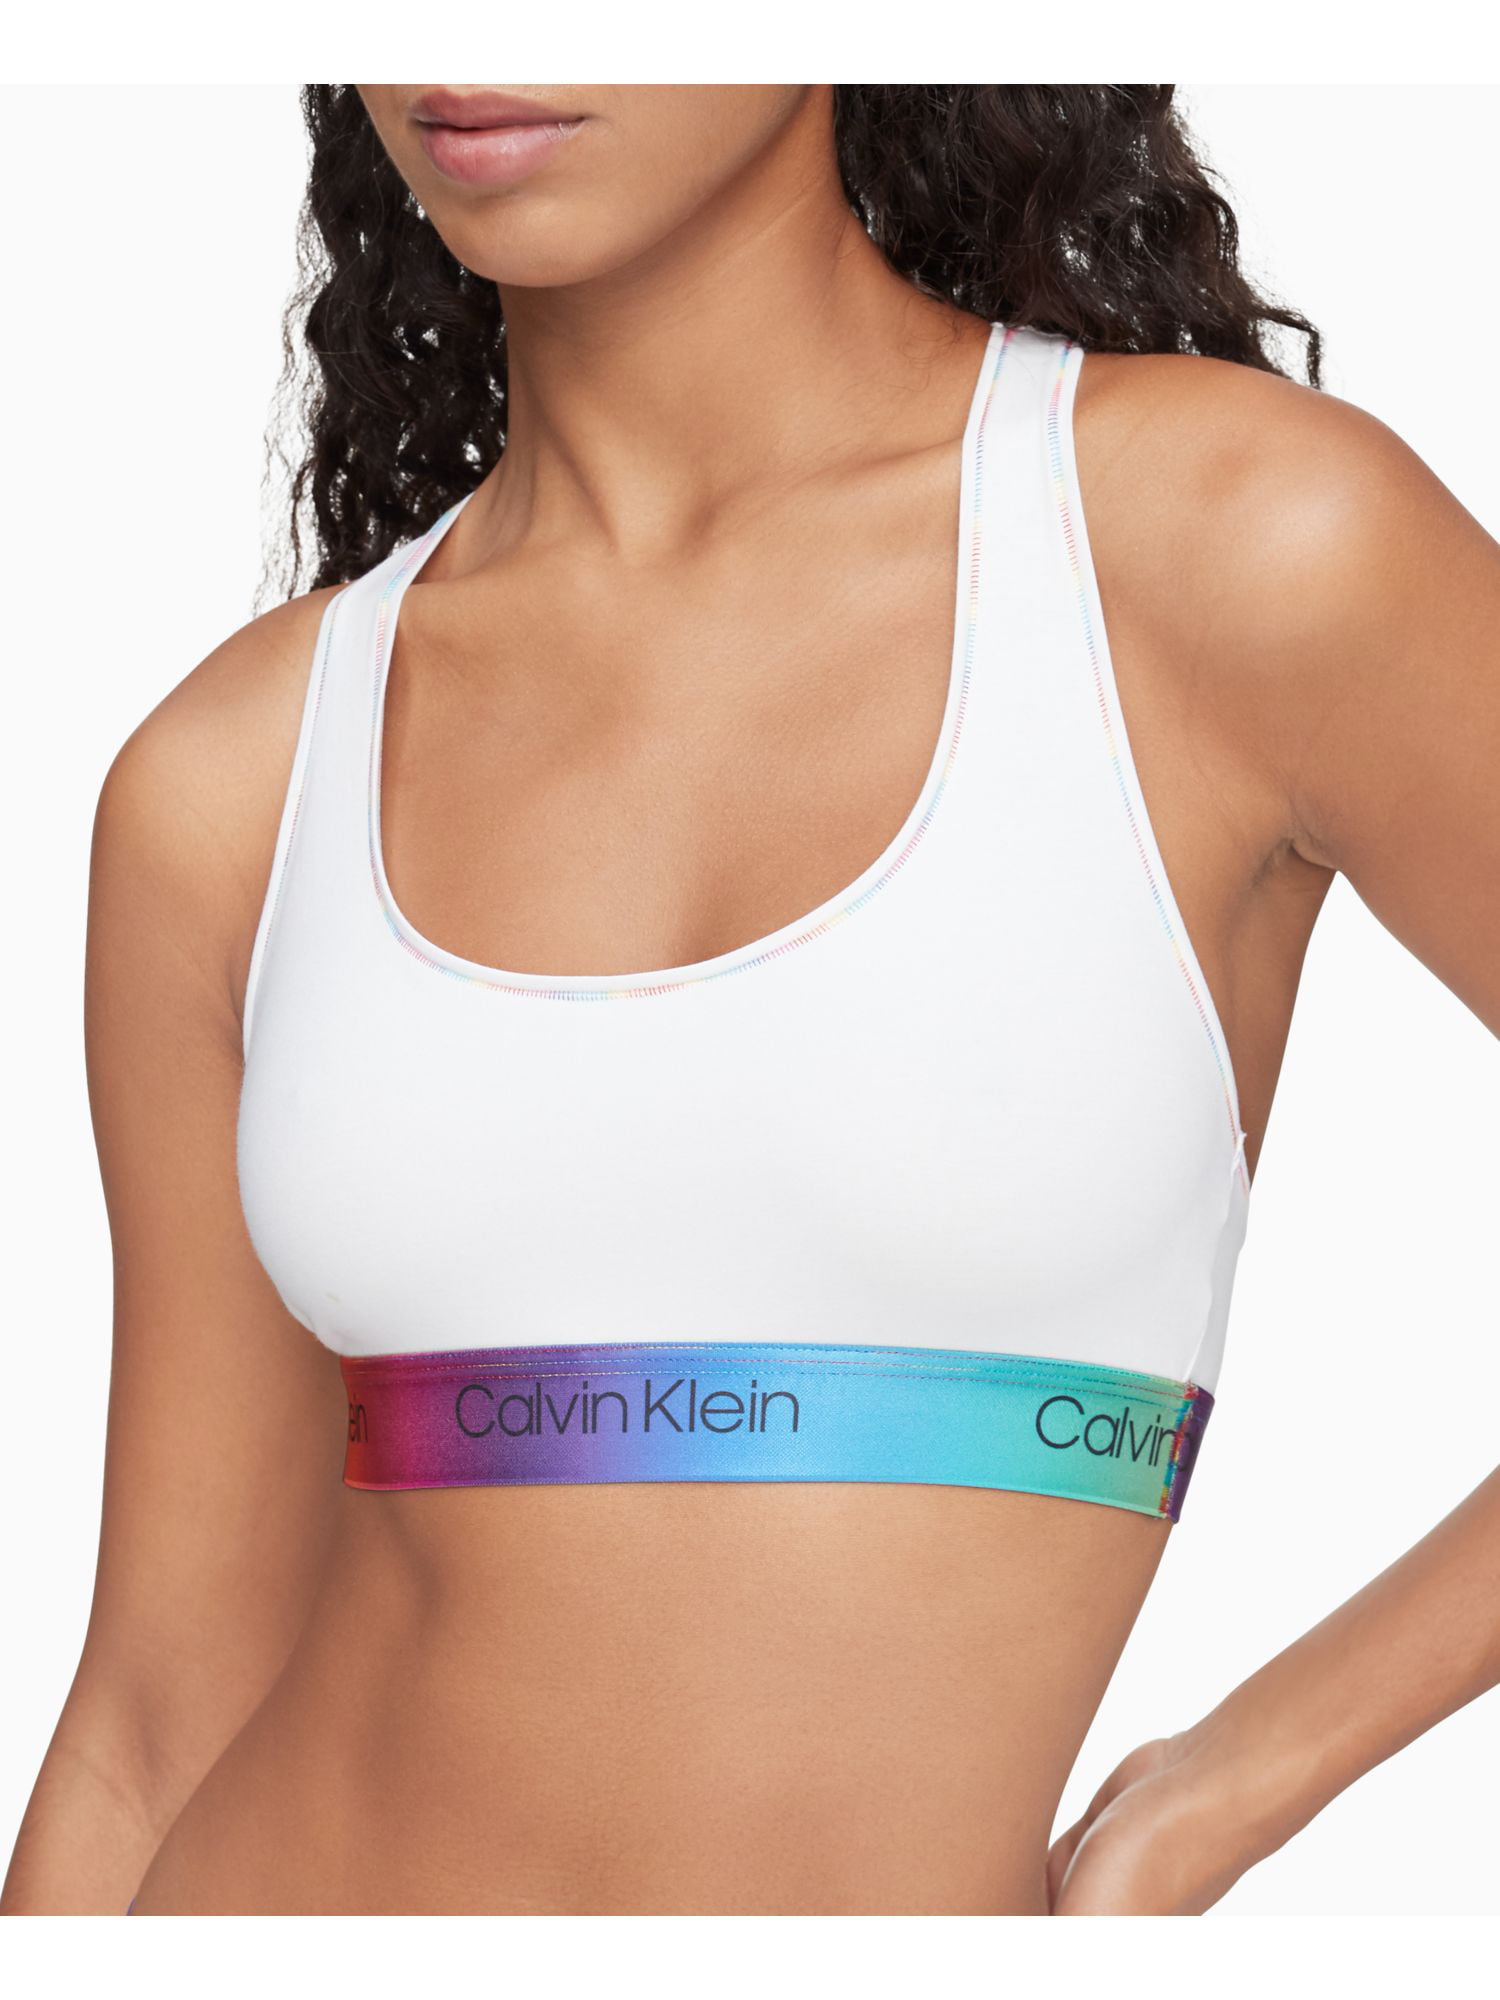 CALVIN KLEIN Intimates White Scoop Neck Unlined Breathable Full